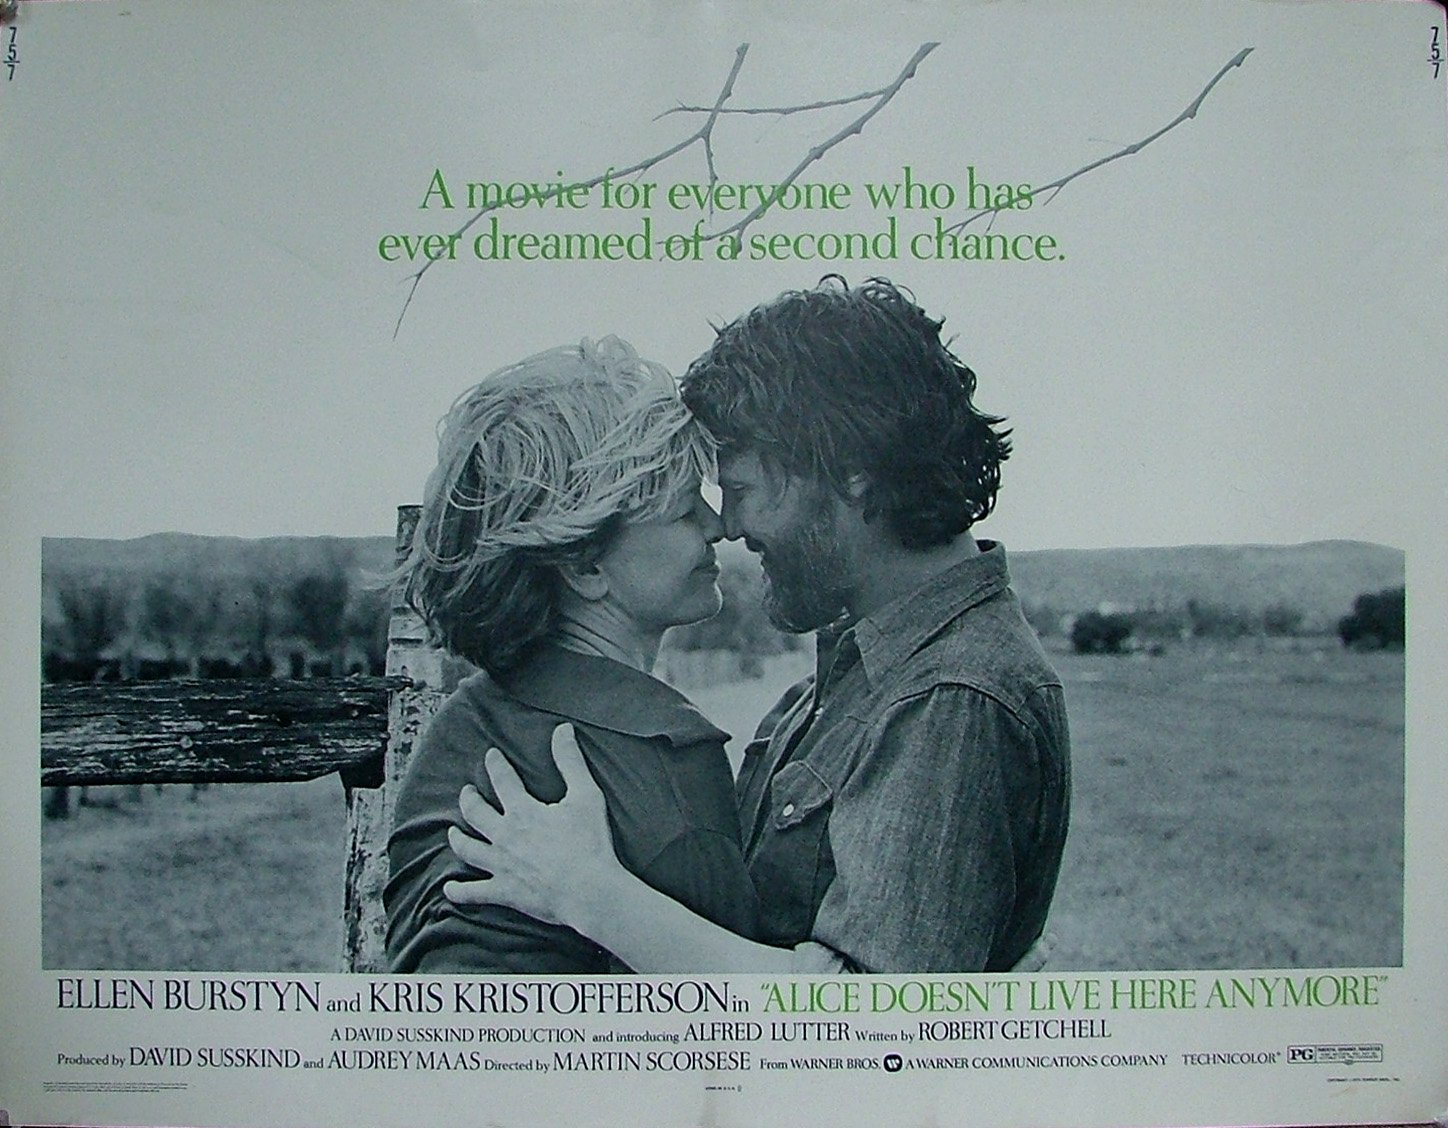 Original vintage cinema movie poster for Alice Doesn't Live Here Anymore, directed by Martin Scorsese